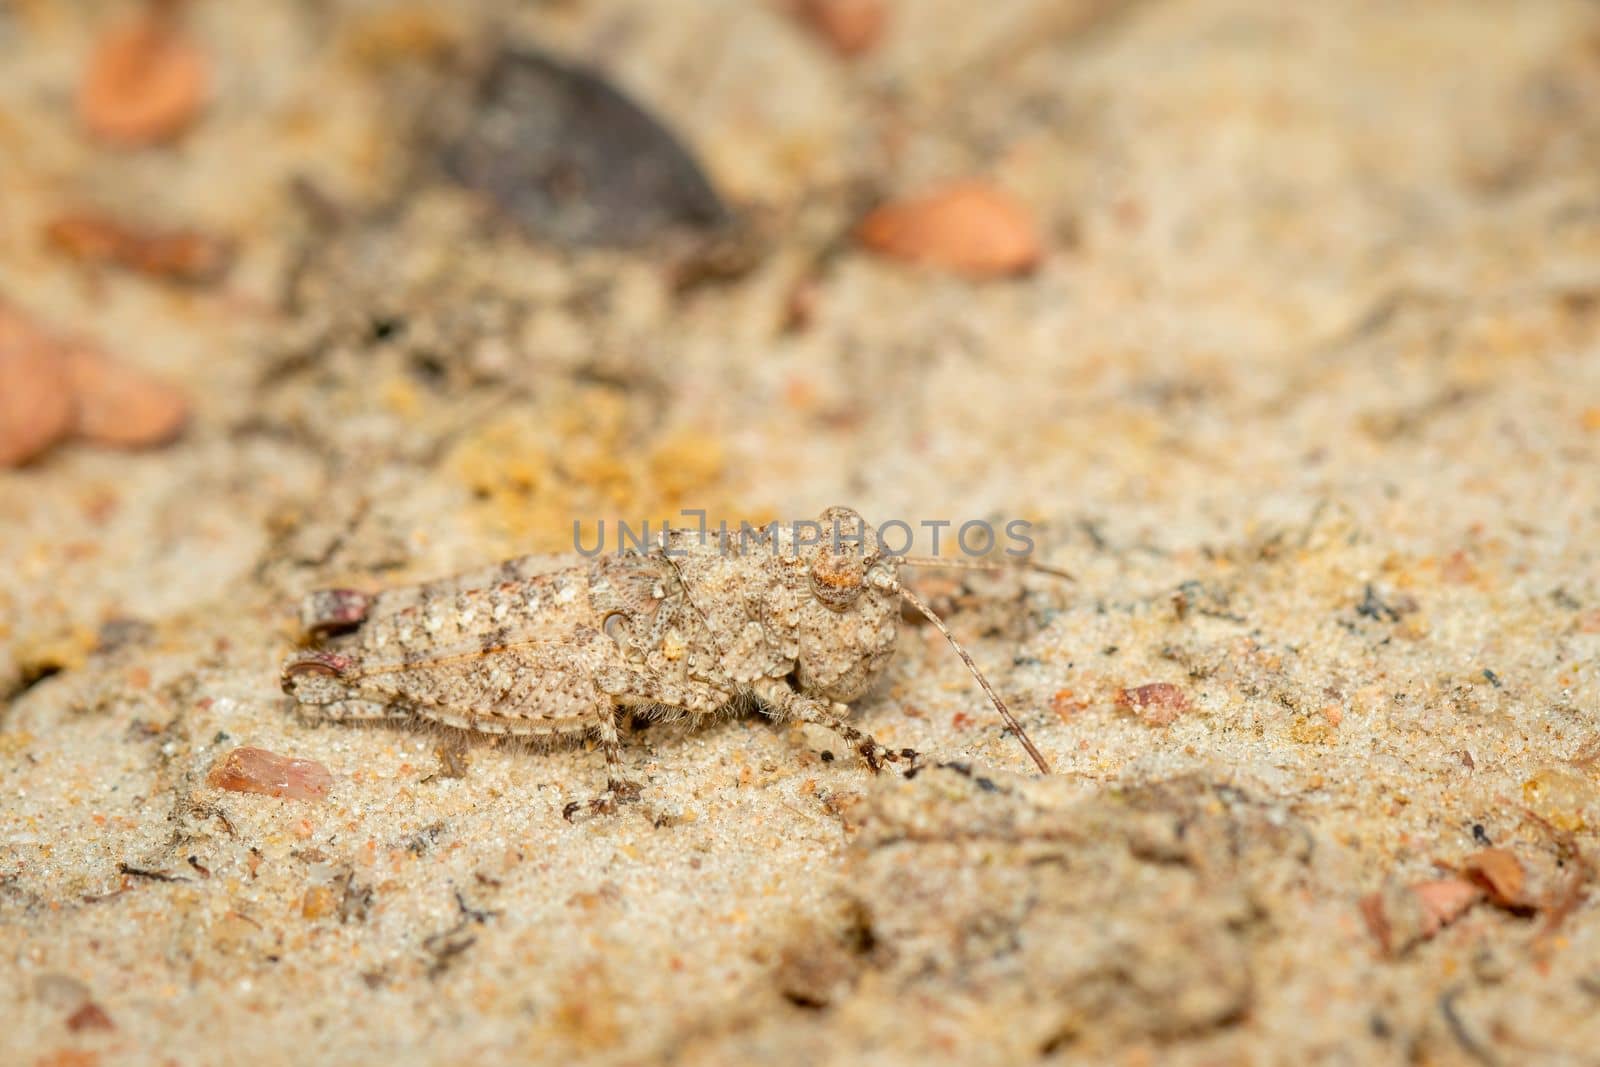 Image of a small brown cricket on the ground. Insect. Animal. 